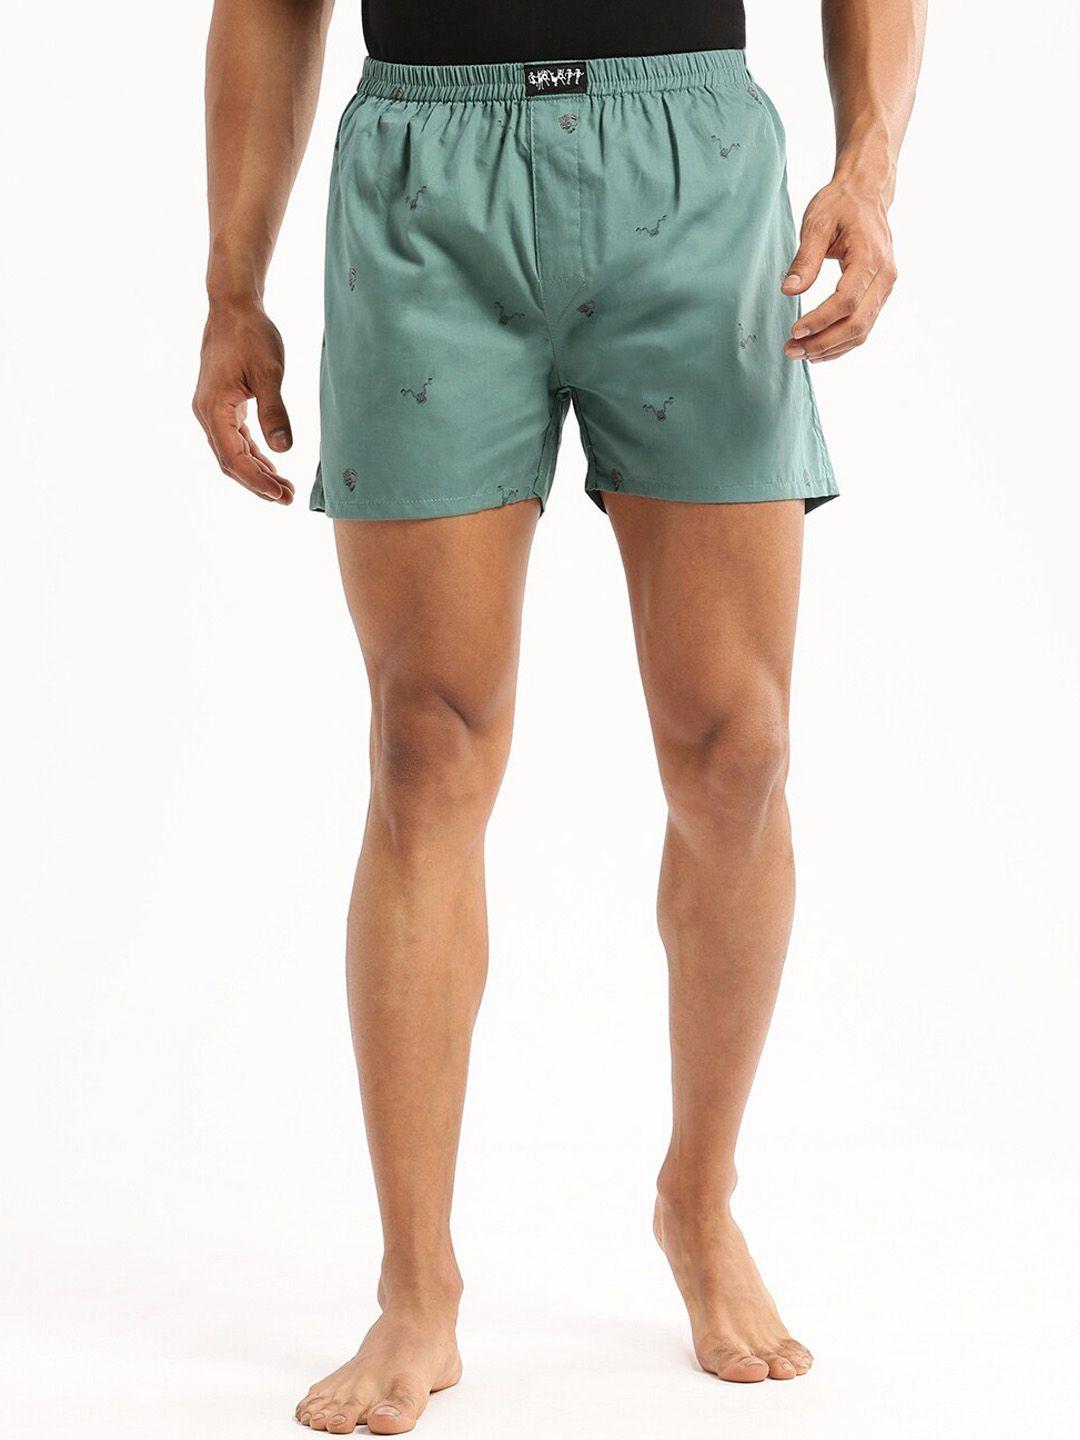 showoff slim fit conversational printed cotton boxer am-126-20_green